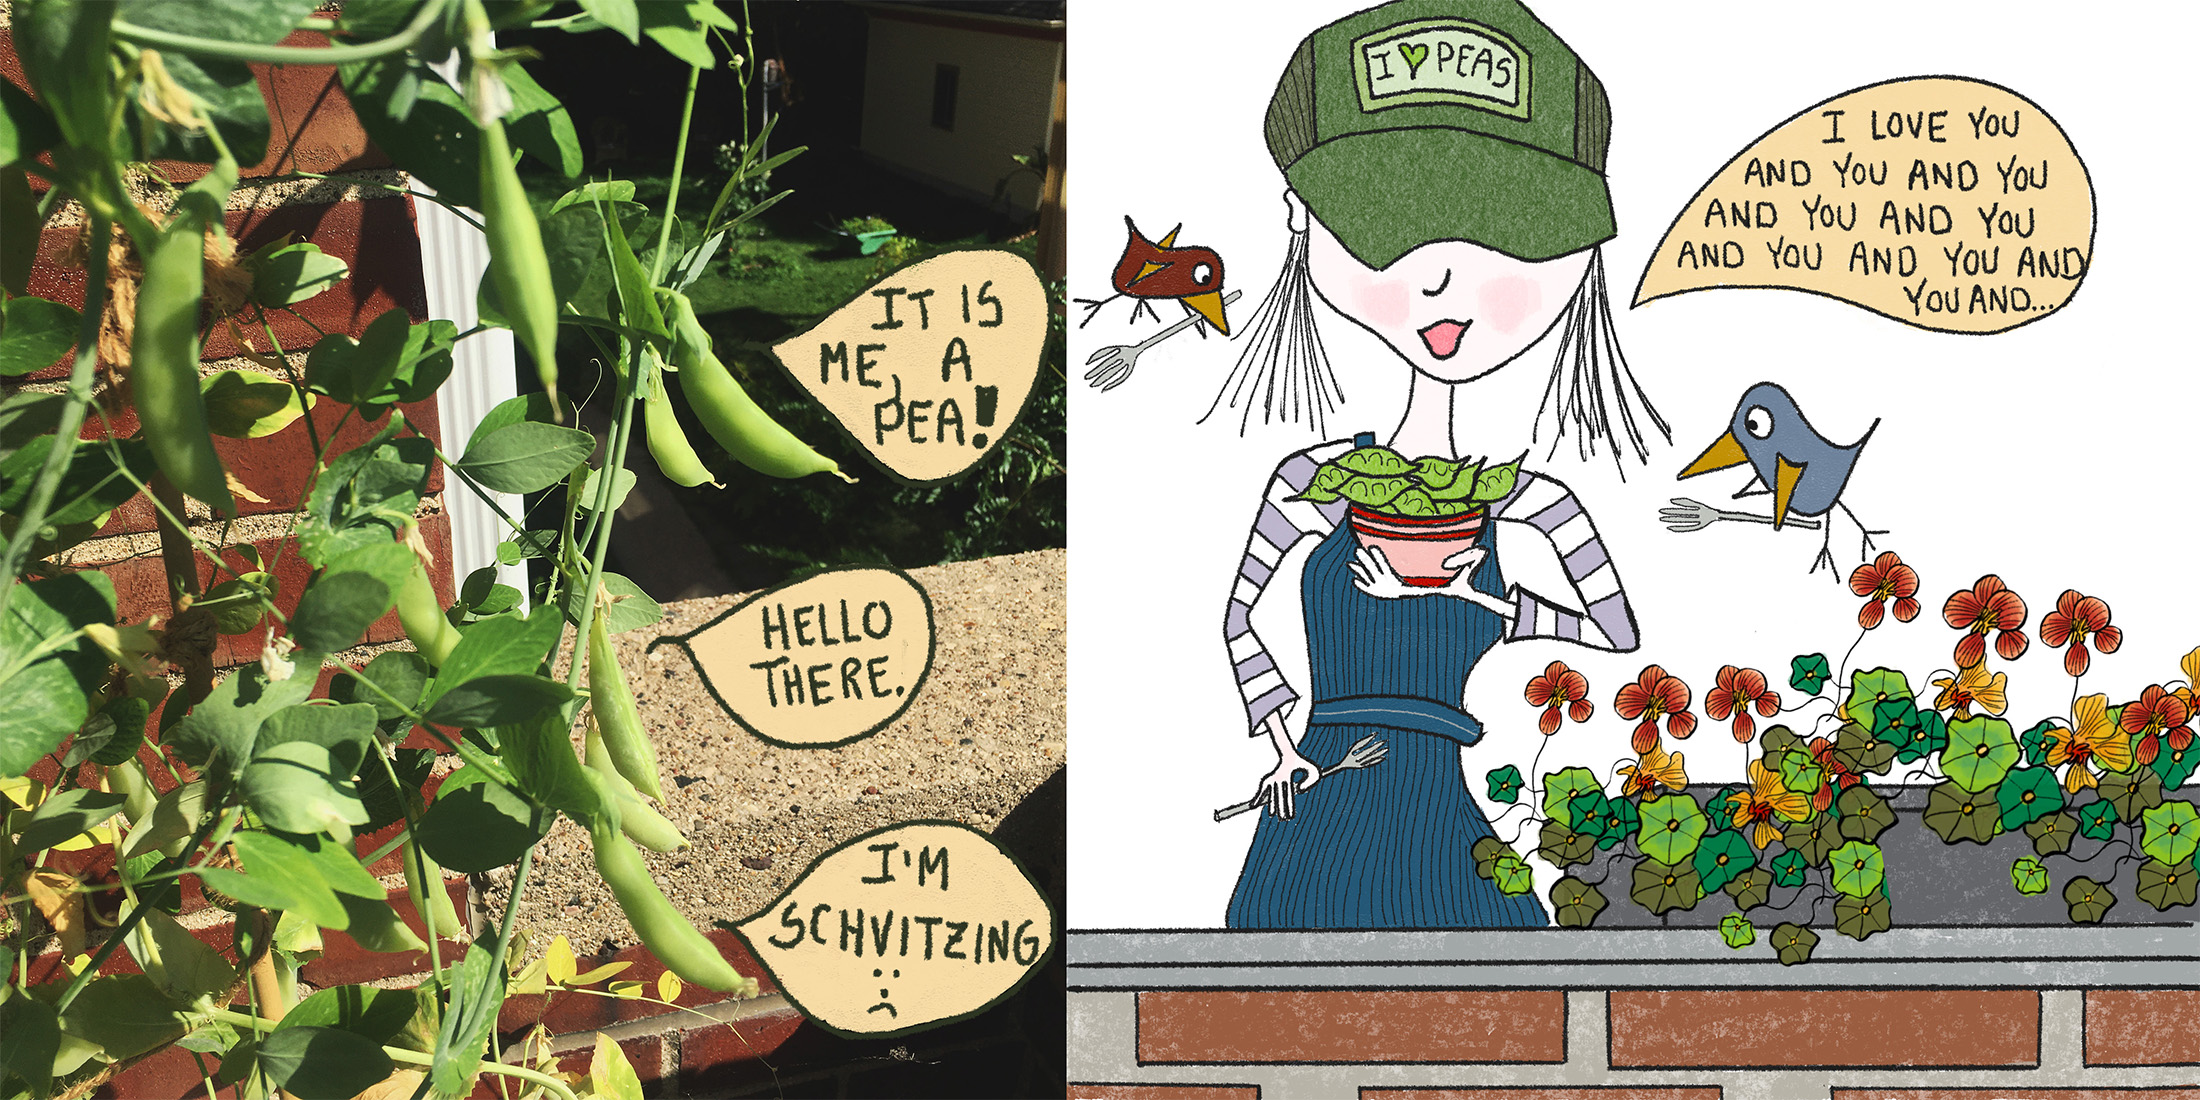 A photo of peas growing on a vine sits next to a cartoon of a woman eating peas